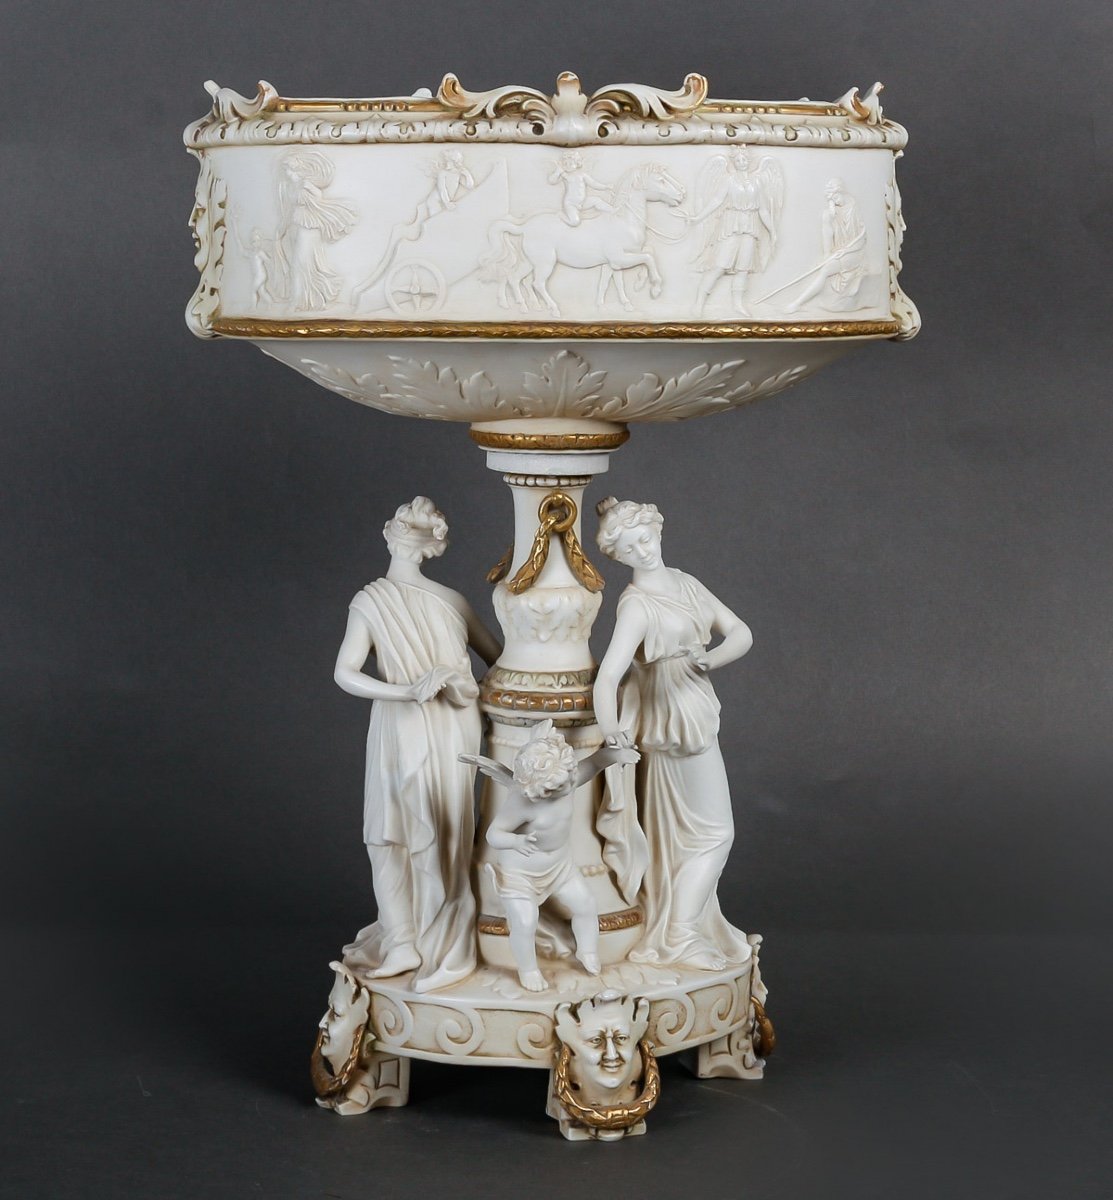 A Biscuit Centerpiece Late Nineteenth Century